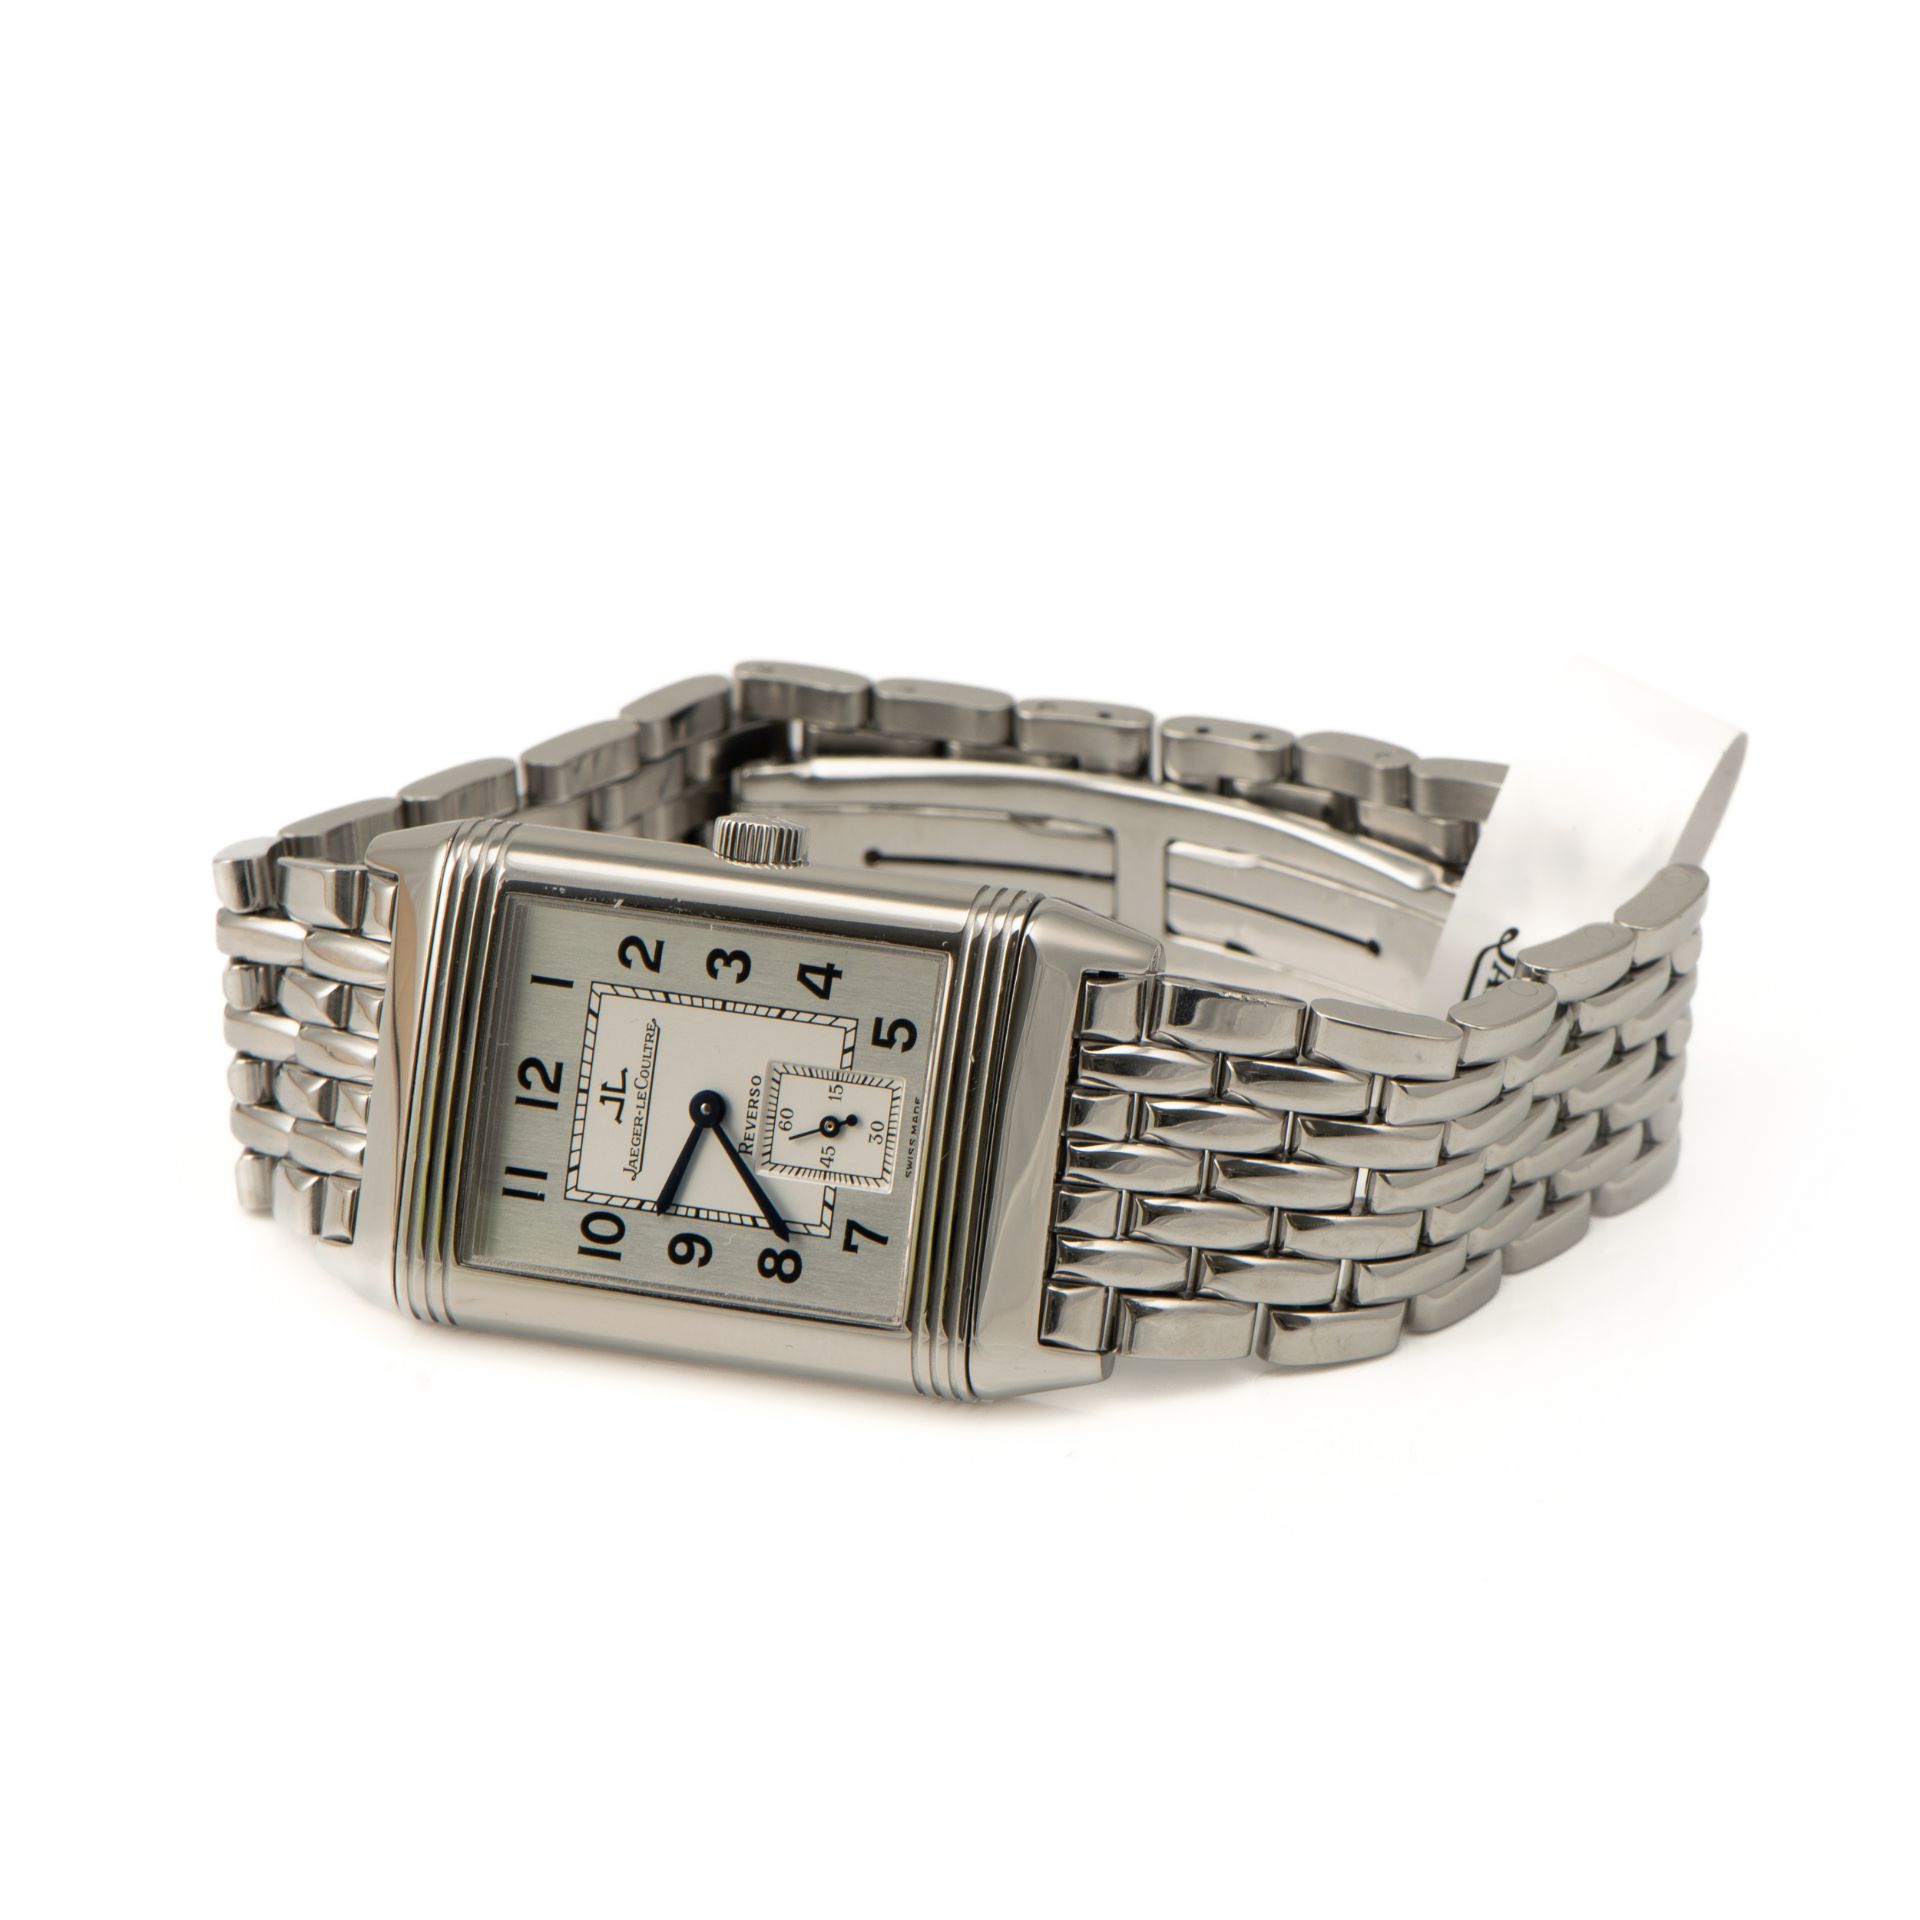 Jaeger-LeCoultre Reverso Grande Taille - Image 2 of 4